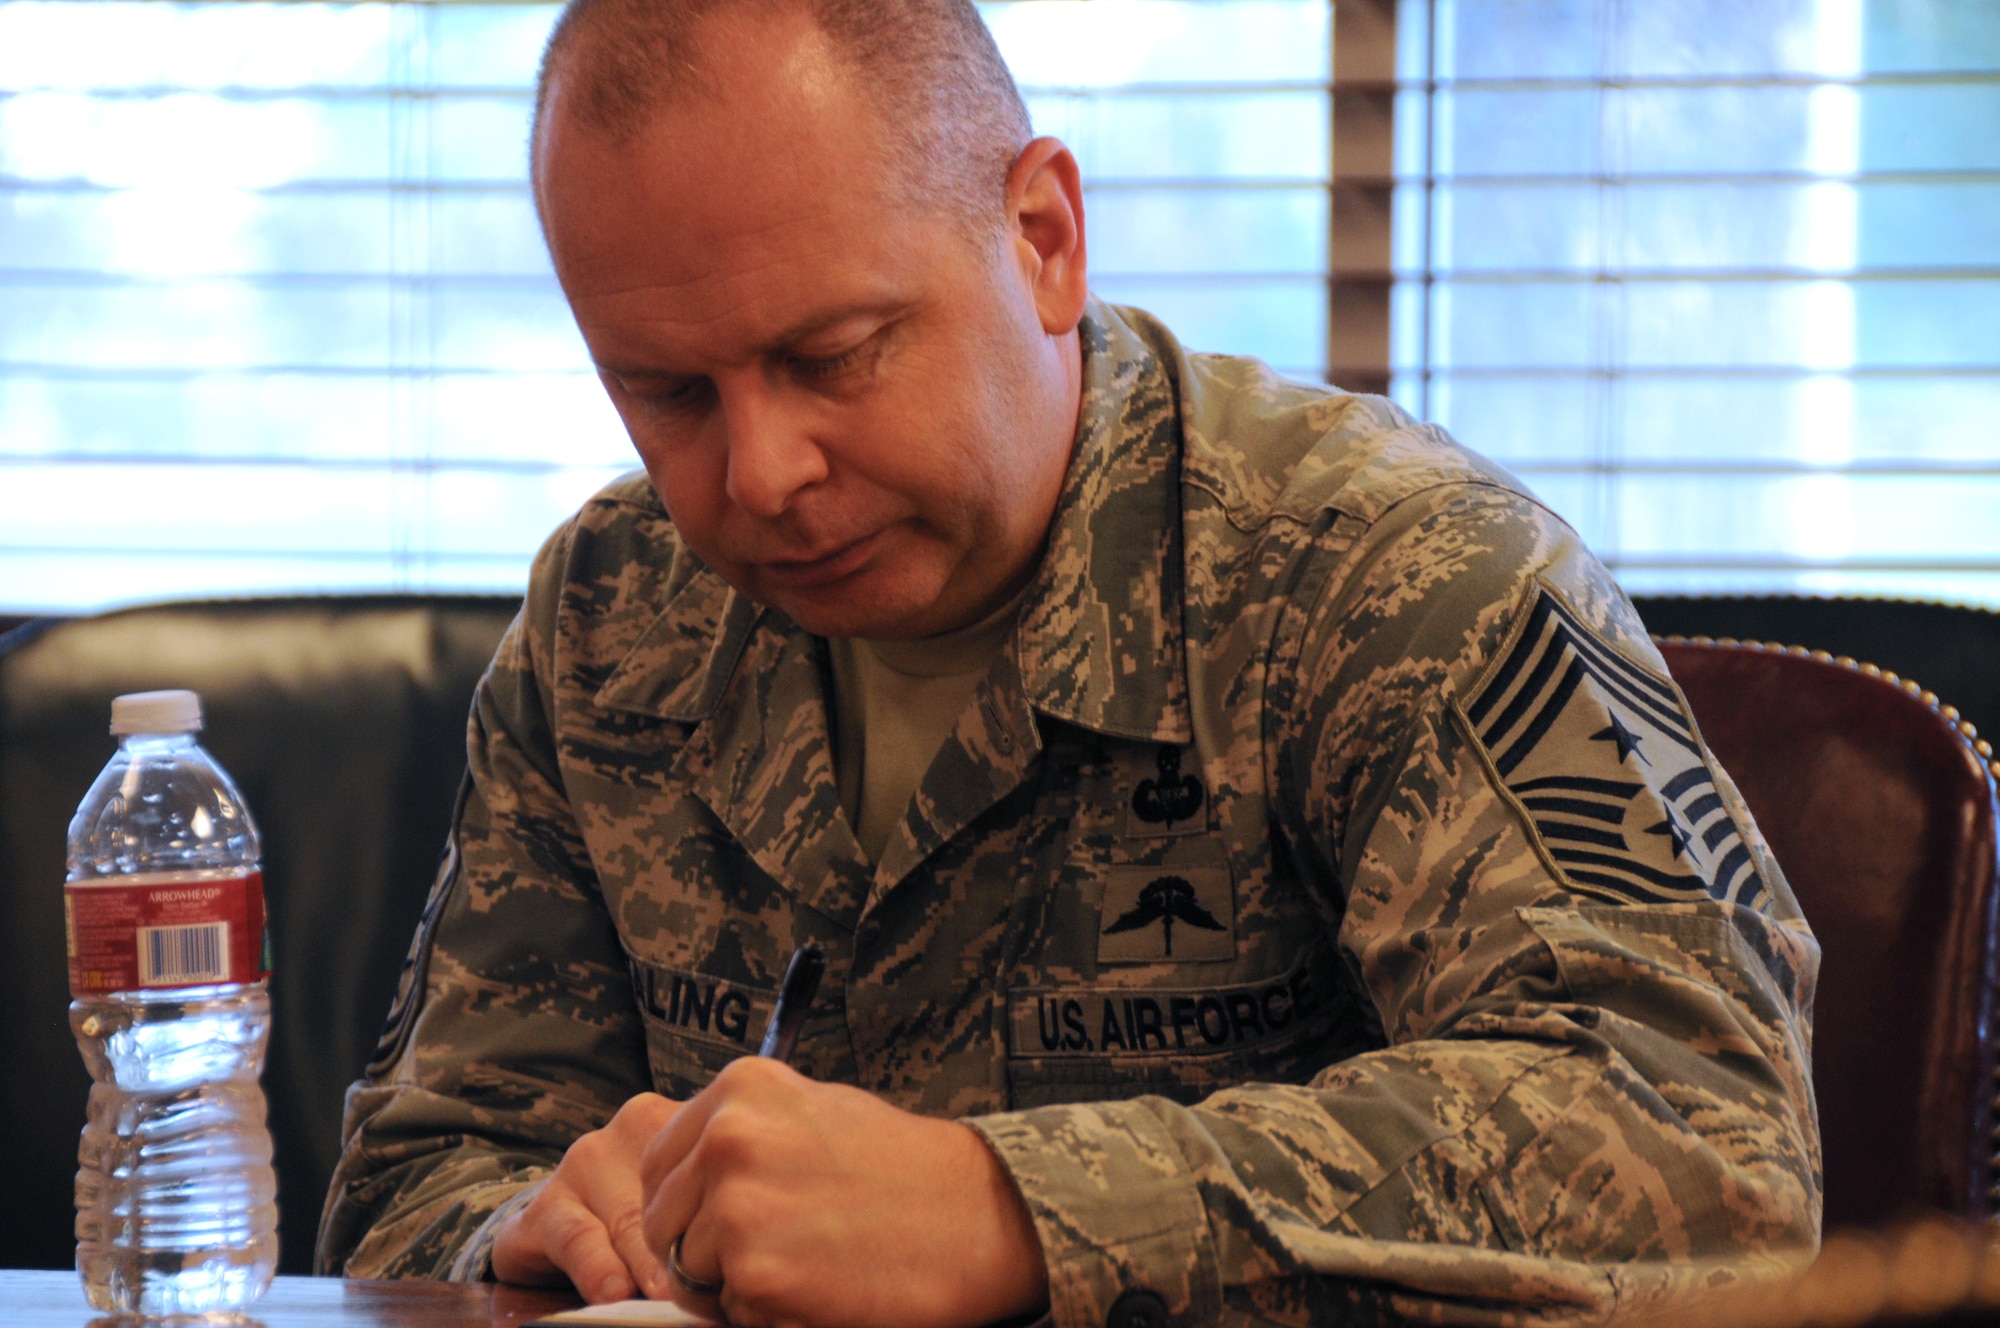 The Command Chief Master Sgt. of the Air National Guard, James W. Hotaling, takes notes during a meeting with the 173rd Fighter Wing Vice Commander, Col. Gregor Leist, during Hotaling's visit to Kingsley Field, Klamath Falls, Ore. July 15, 2014. Hotaling spent the day meeting and speaking with the Airmen of the 173rd FW and 270th Air Traffic Control Squadron. (U.S. Air National Guard photo by Master Sgt. Jennifer Shirar/Released)